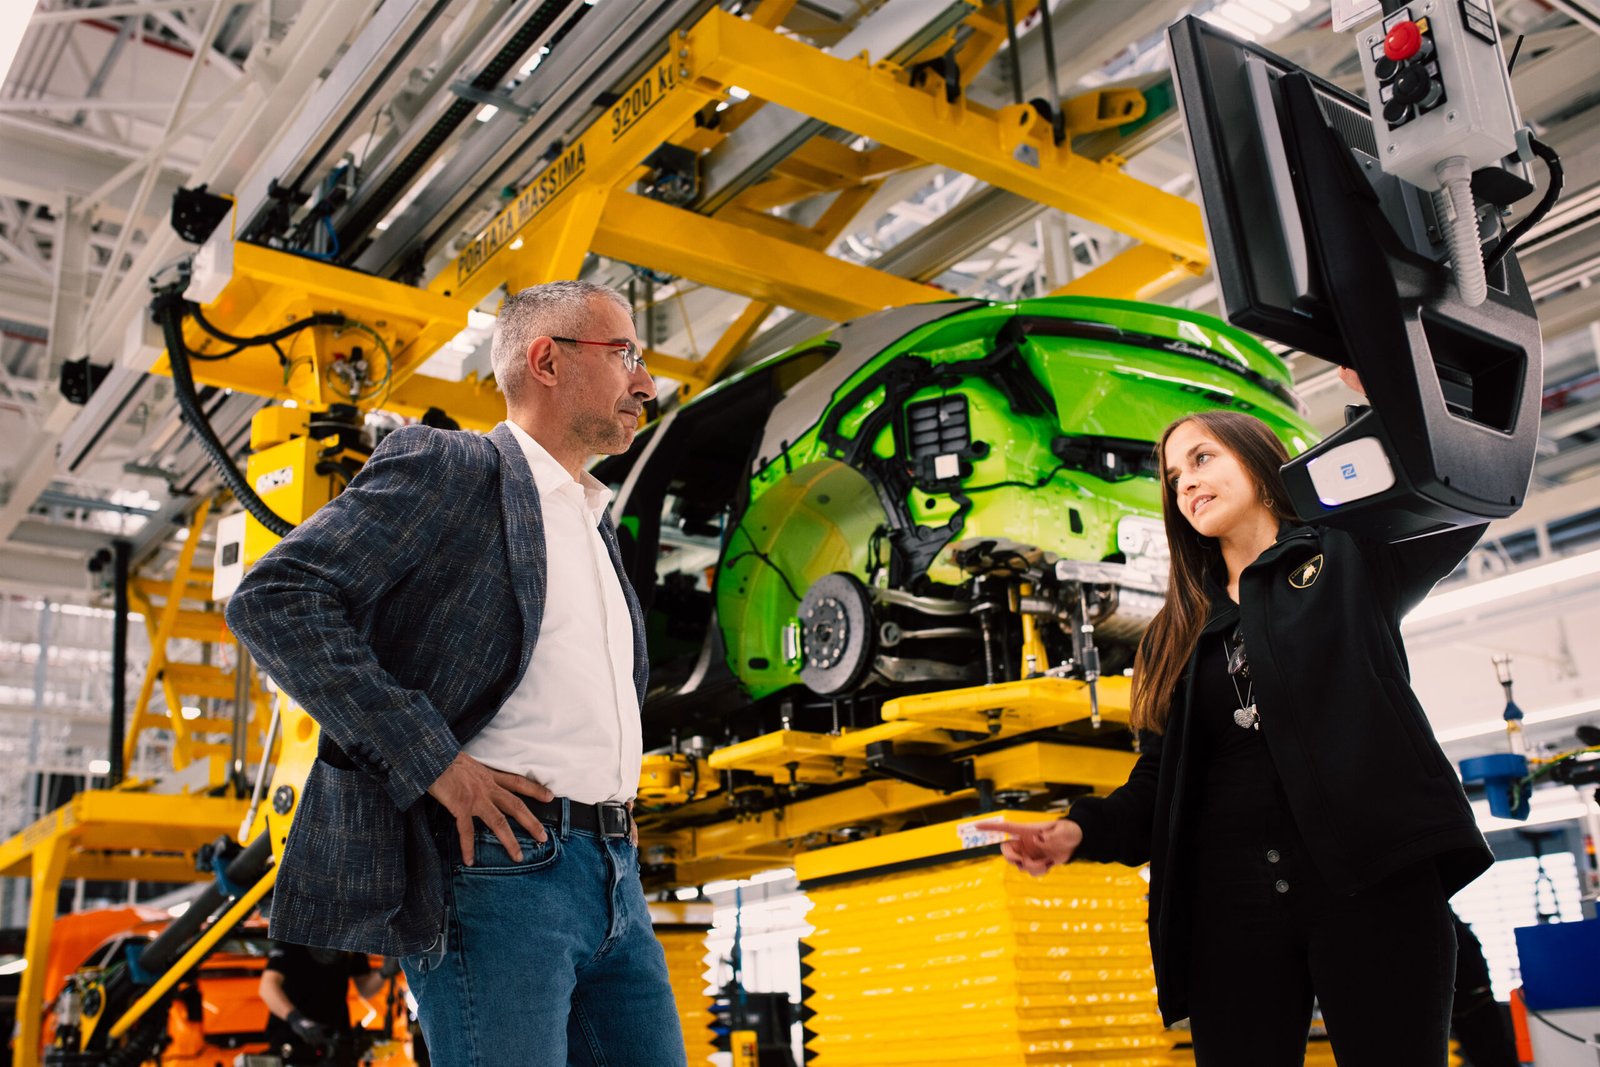 Automobili Lamborghini obtains the IDEM certification for its equality policy